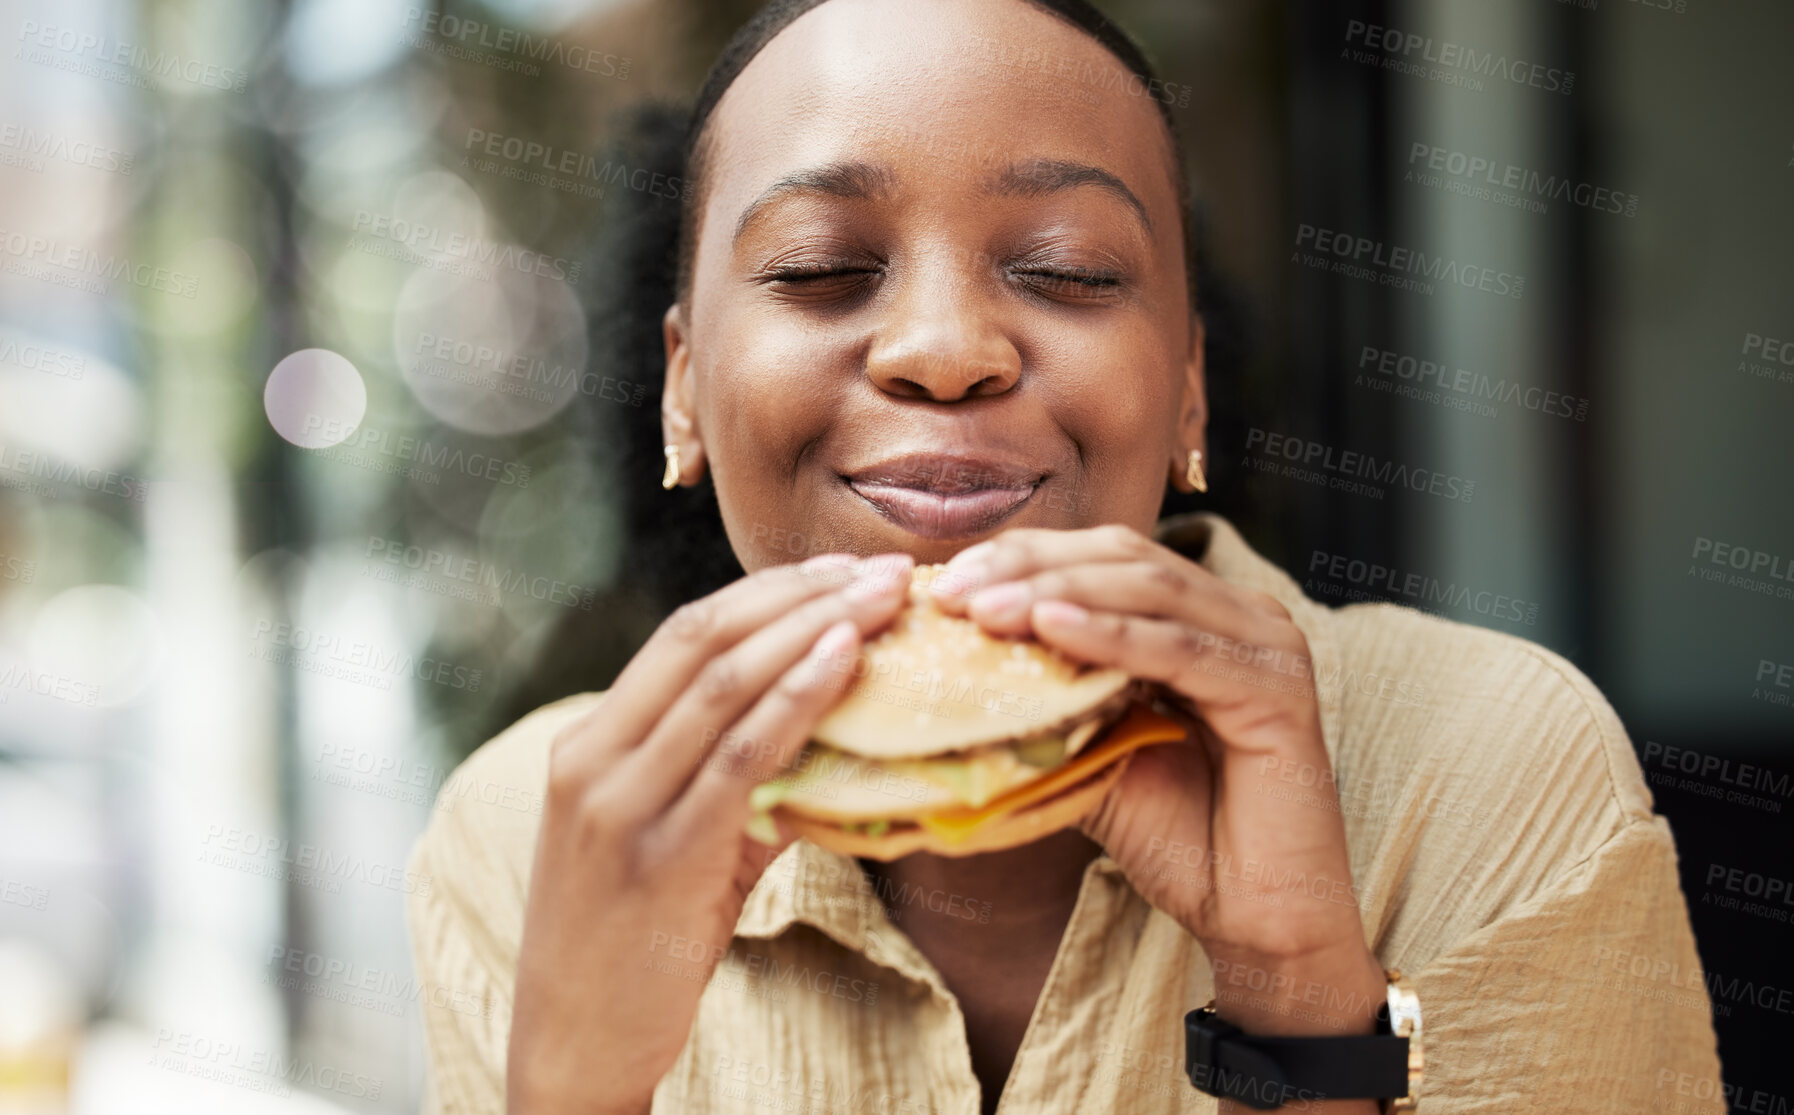 Buy stock photo Restaurant, fast food and black woman eating a burger in an outdoor cafe as a lunch meal craving deal. Breakfast, sandwich and young female person or customer enjoying a tasty unhealthy snack